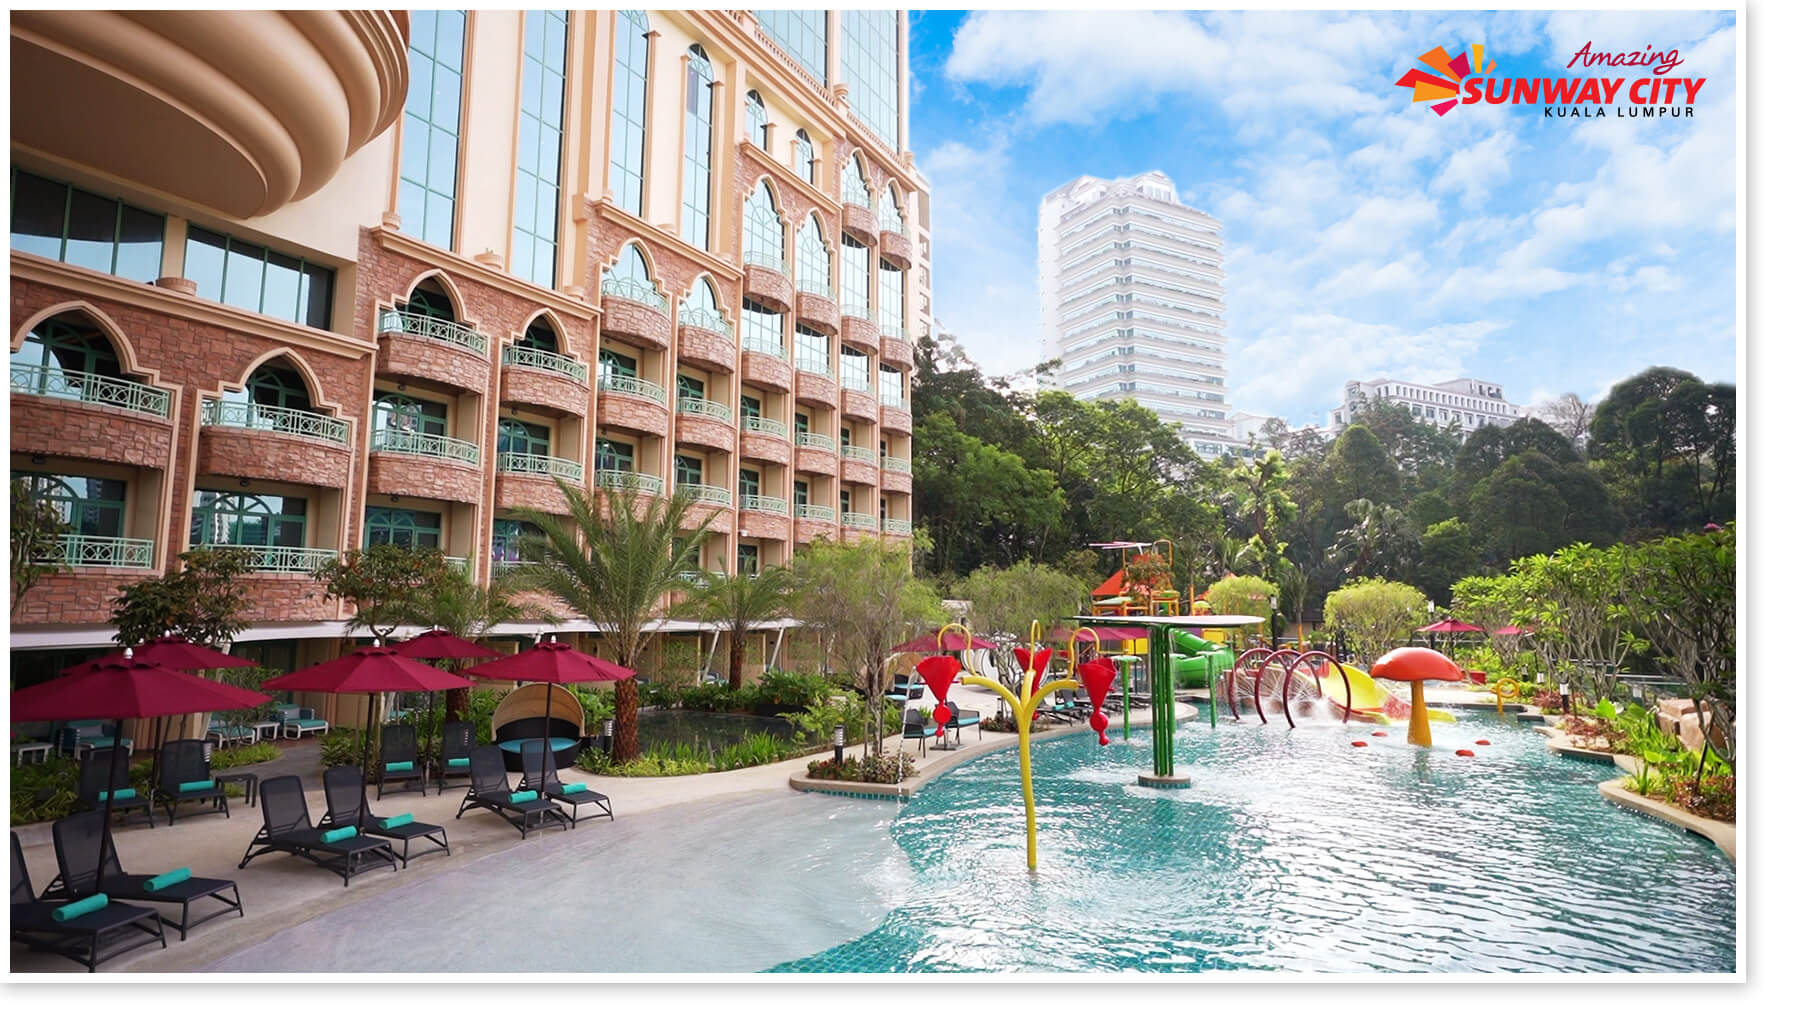 Escape the urban hustle in this relaxing escapade tucked in the heart of Sunway City Kuala Lumpur.